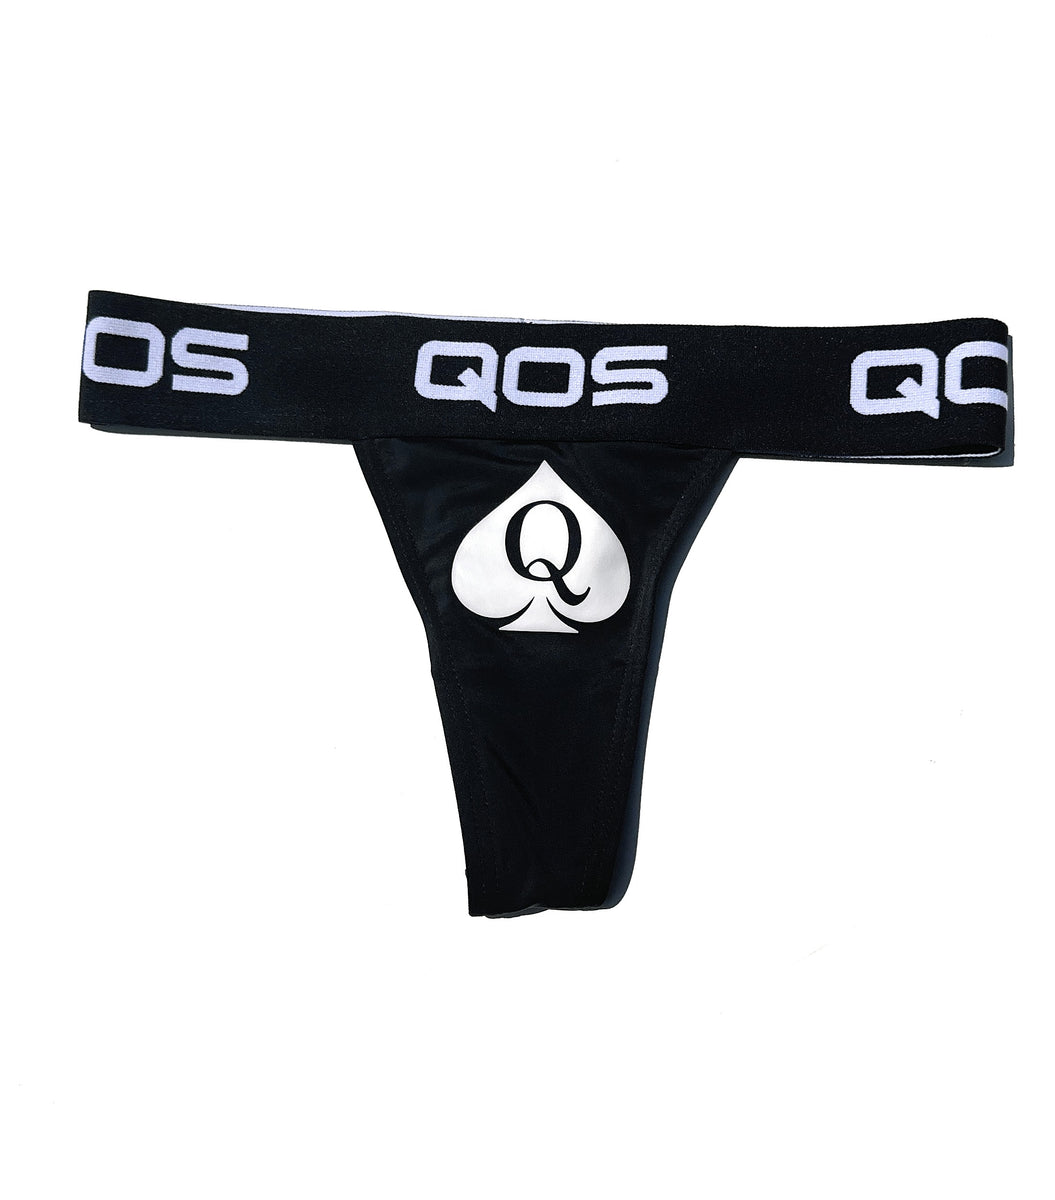 ICONIC QOS BRAND- Queen Of Spades